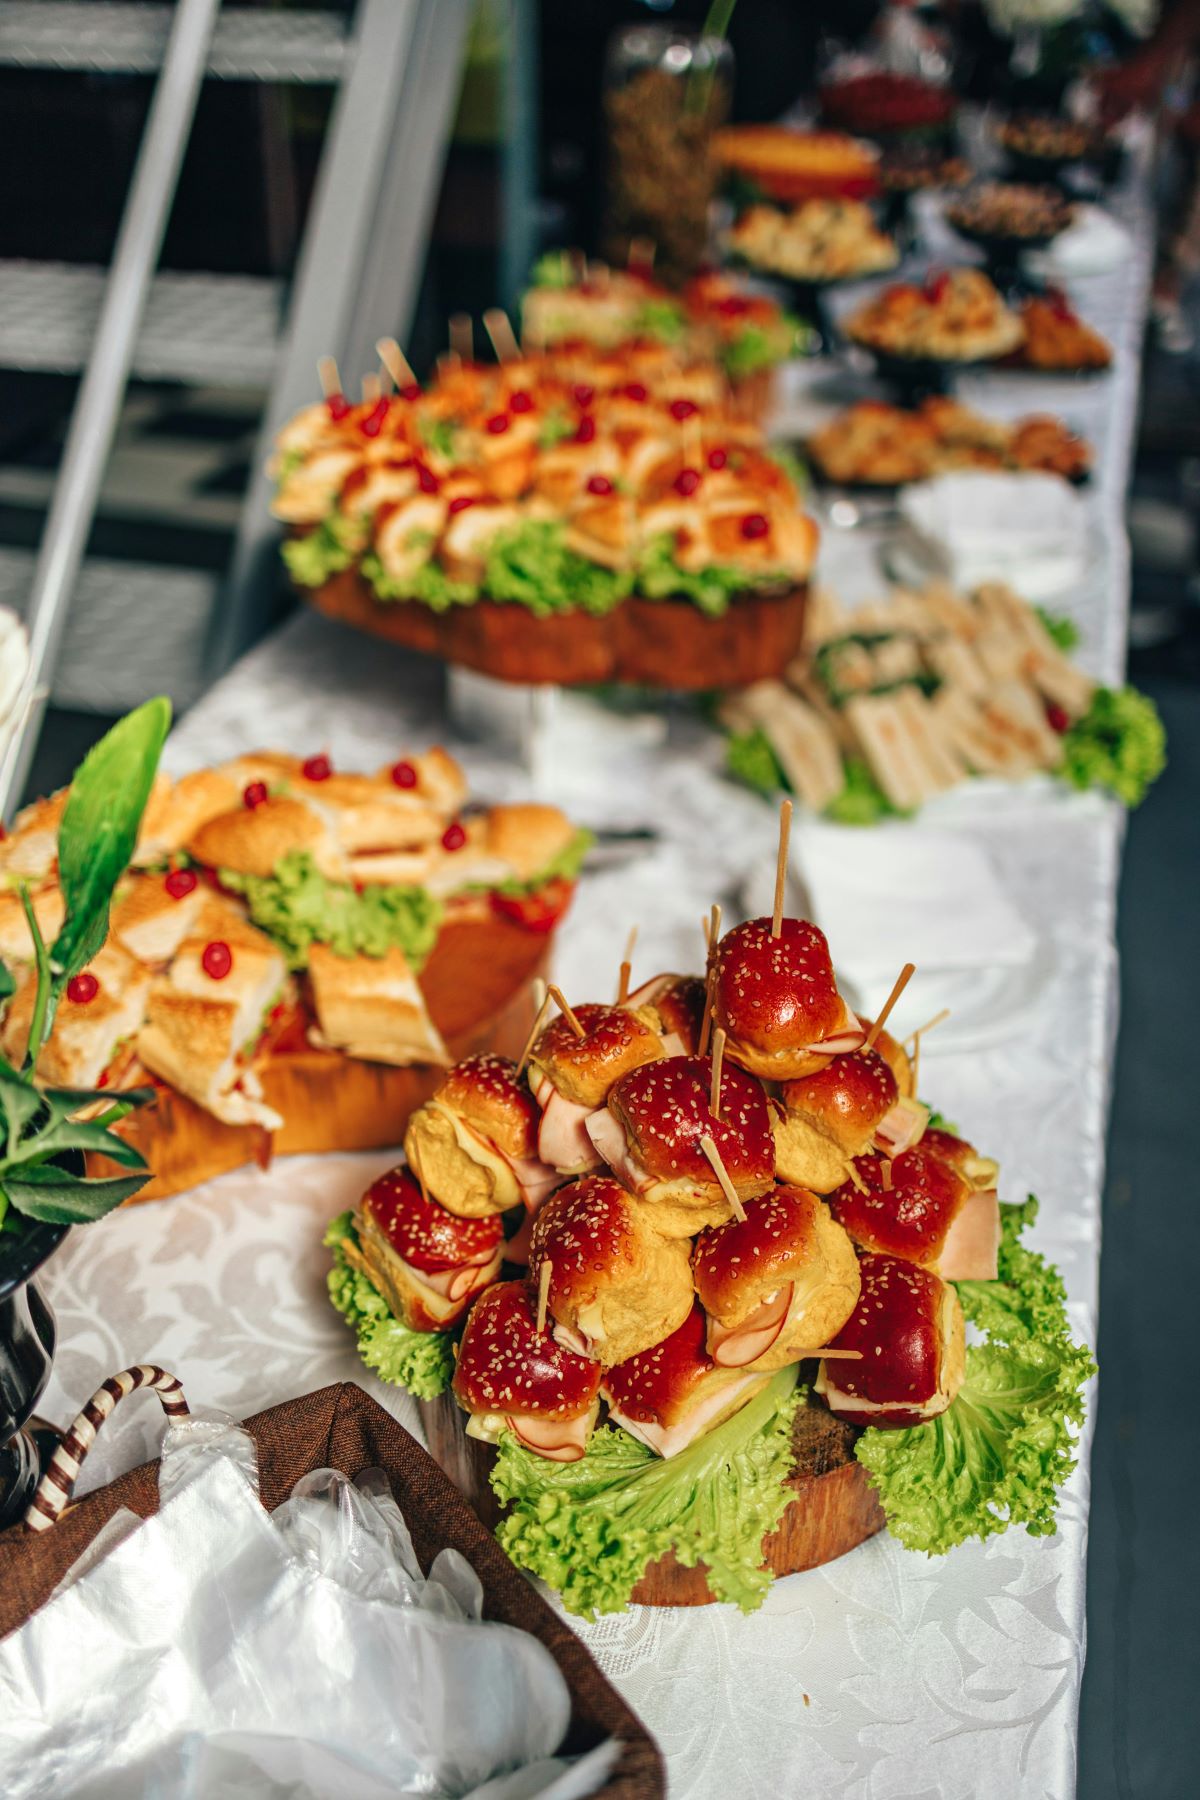 How to Choose the Right Sandwich Catering for Your Office Event